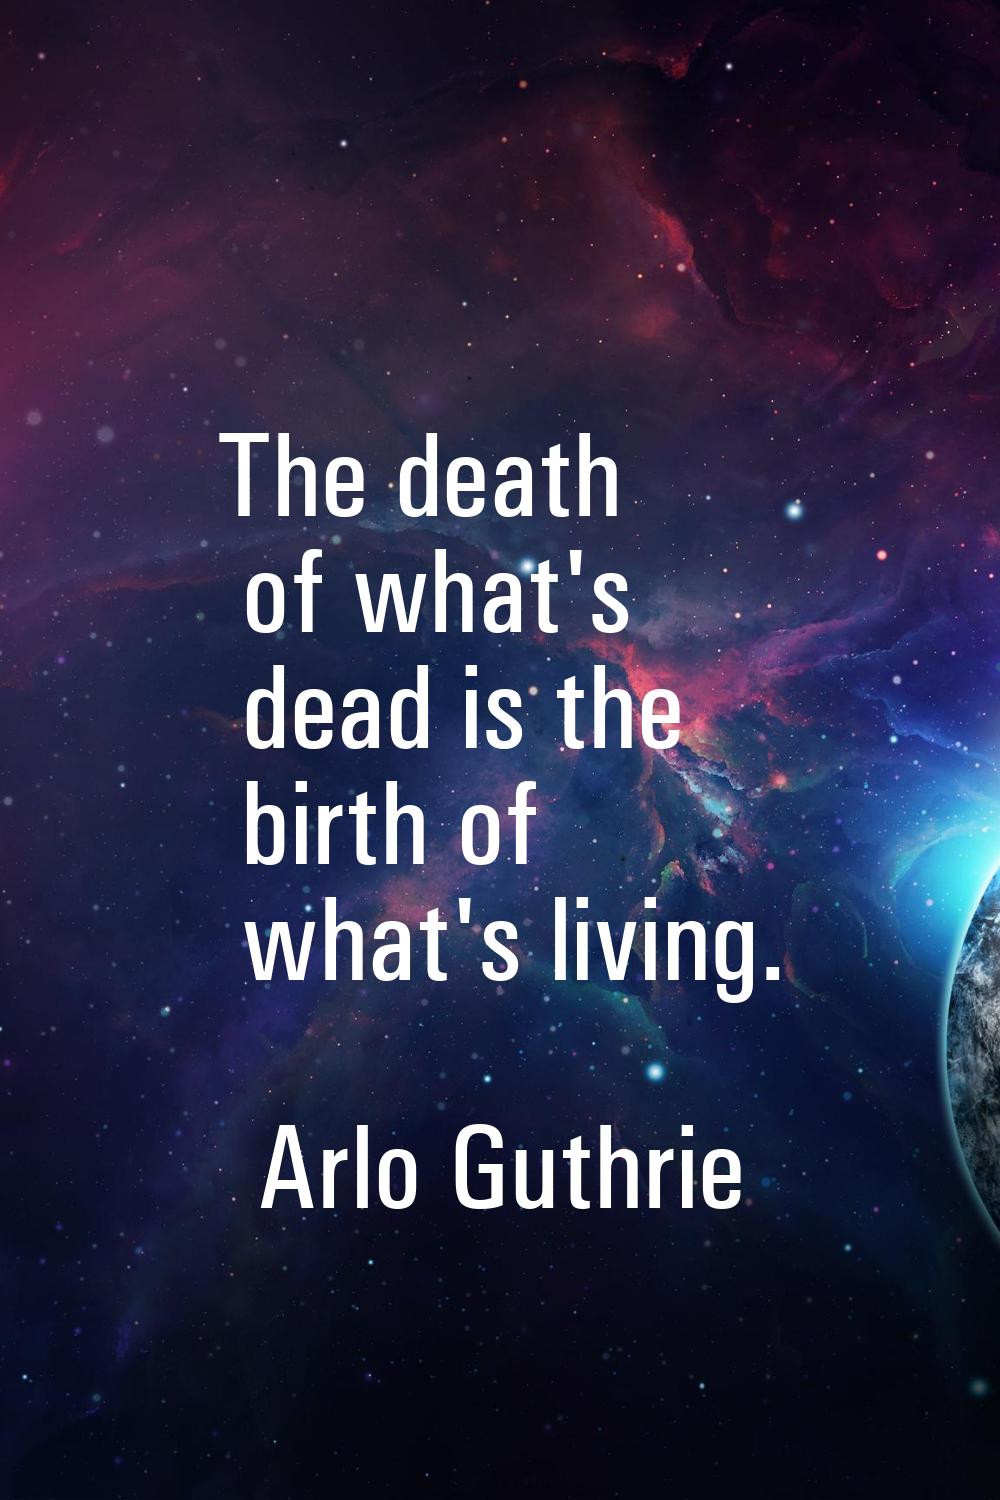 The death of what's dead is the birth of what's living.